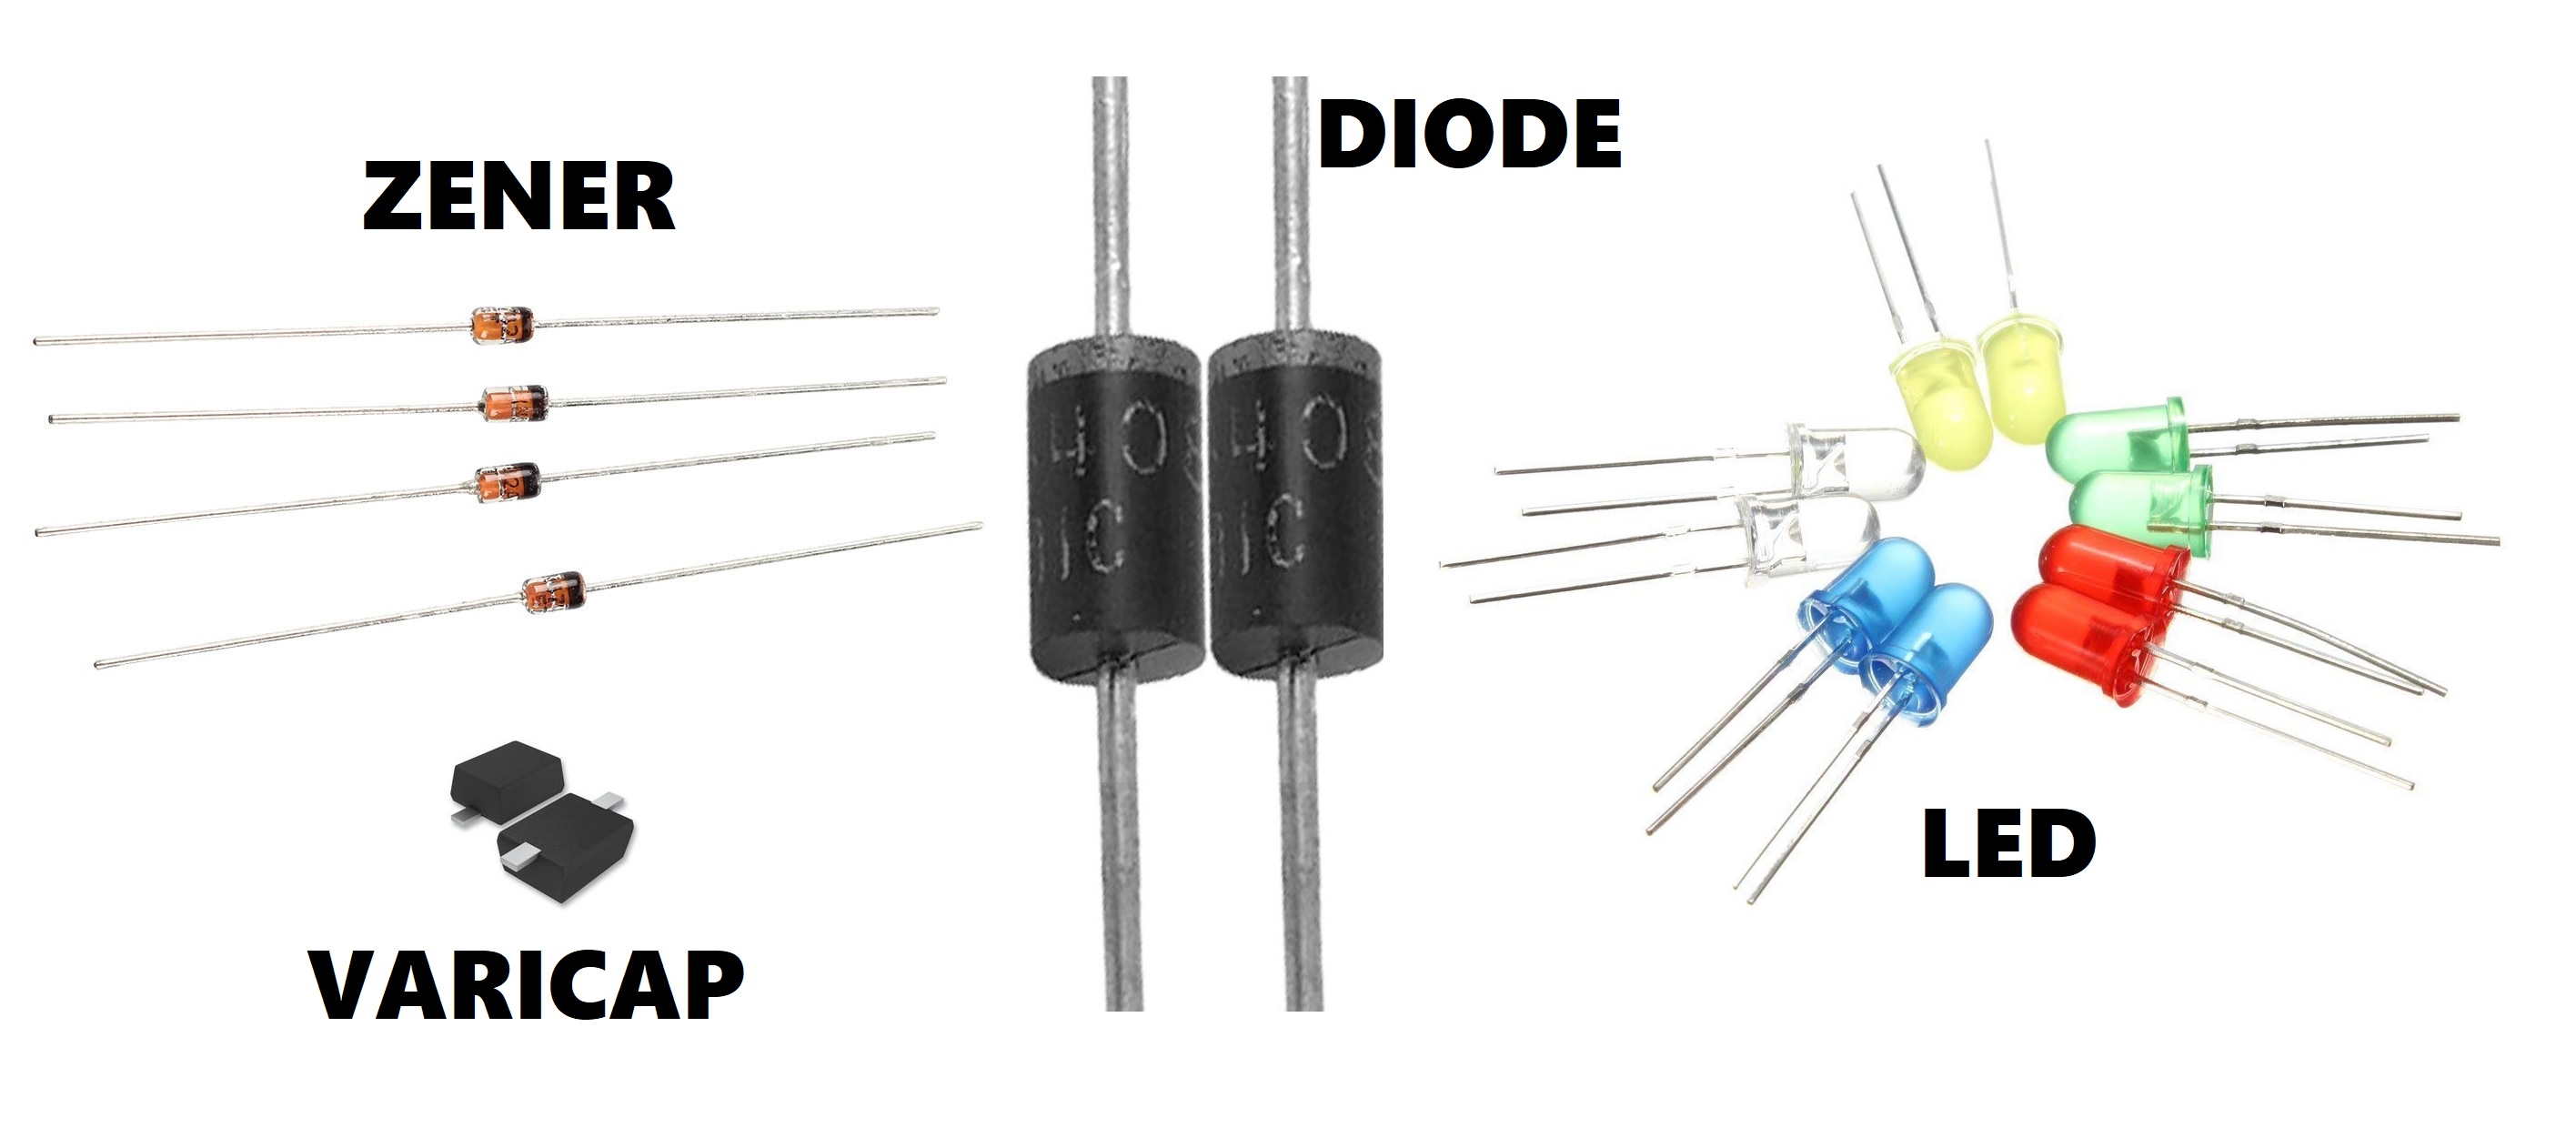 diodes